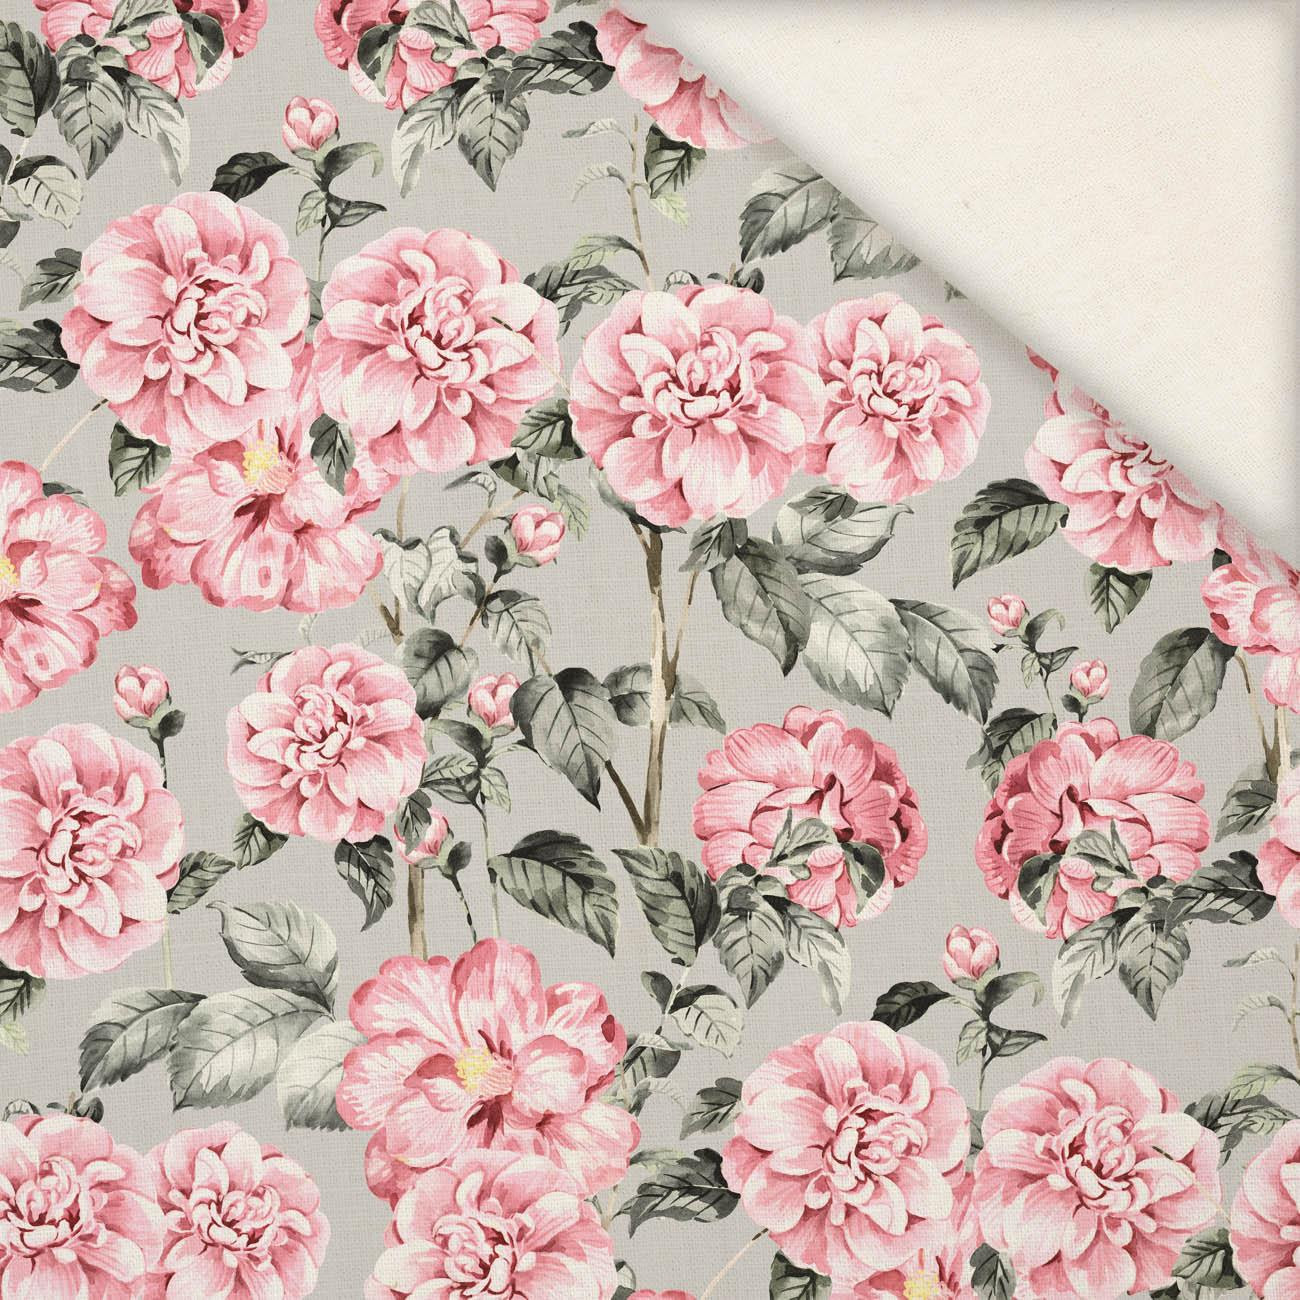 PINK PEONIES pat. 4 - Linen with viscose